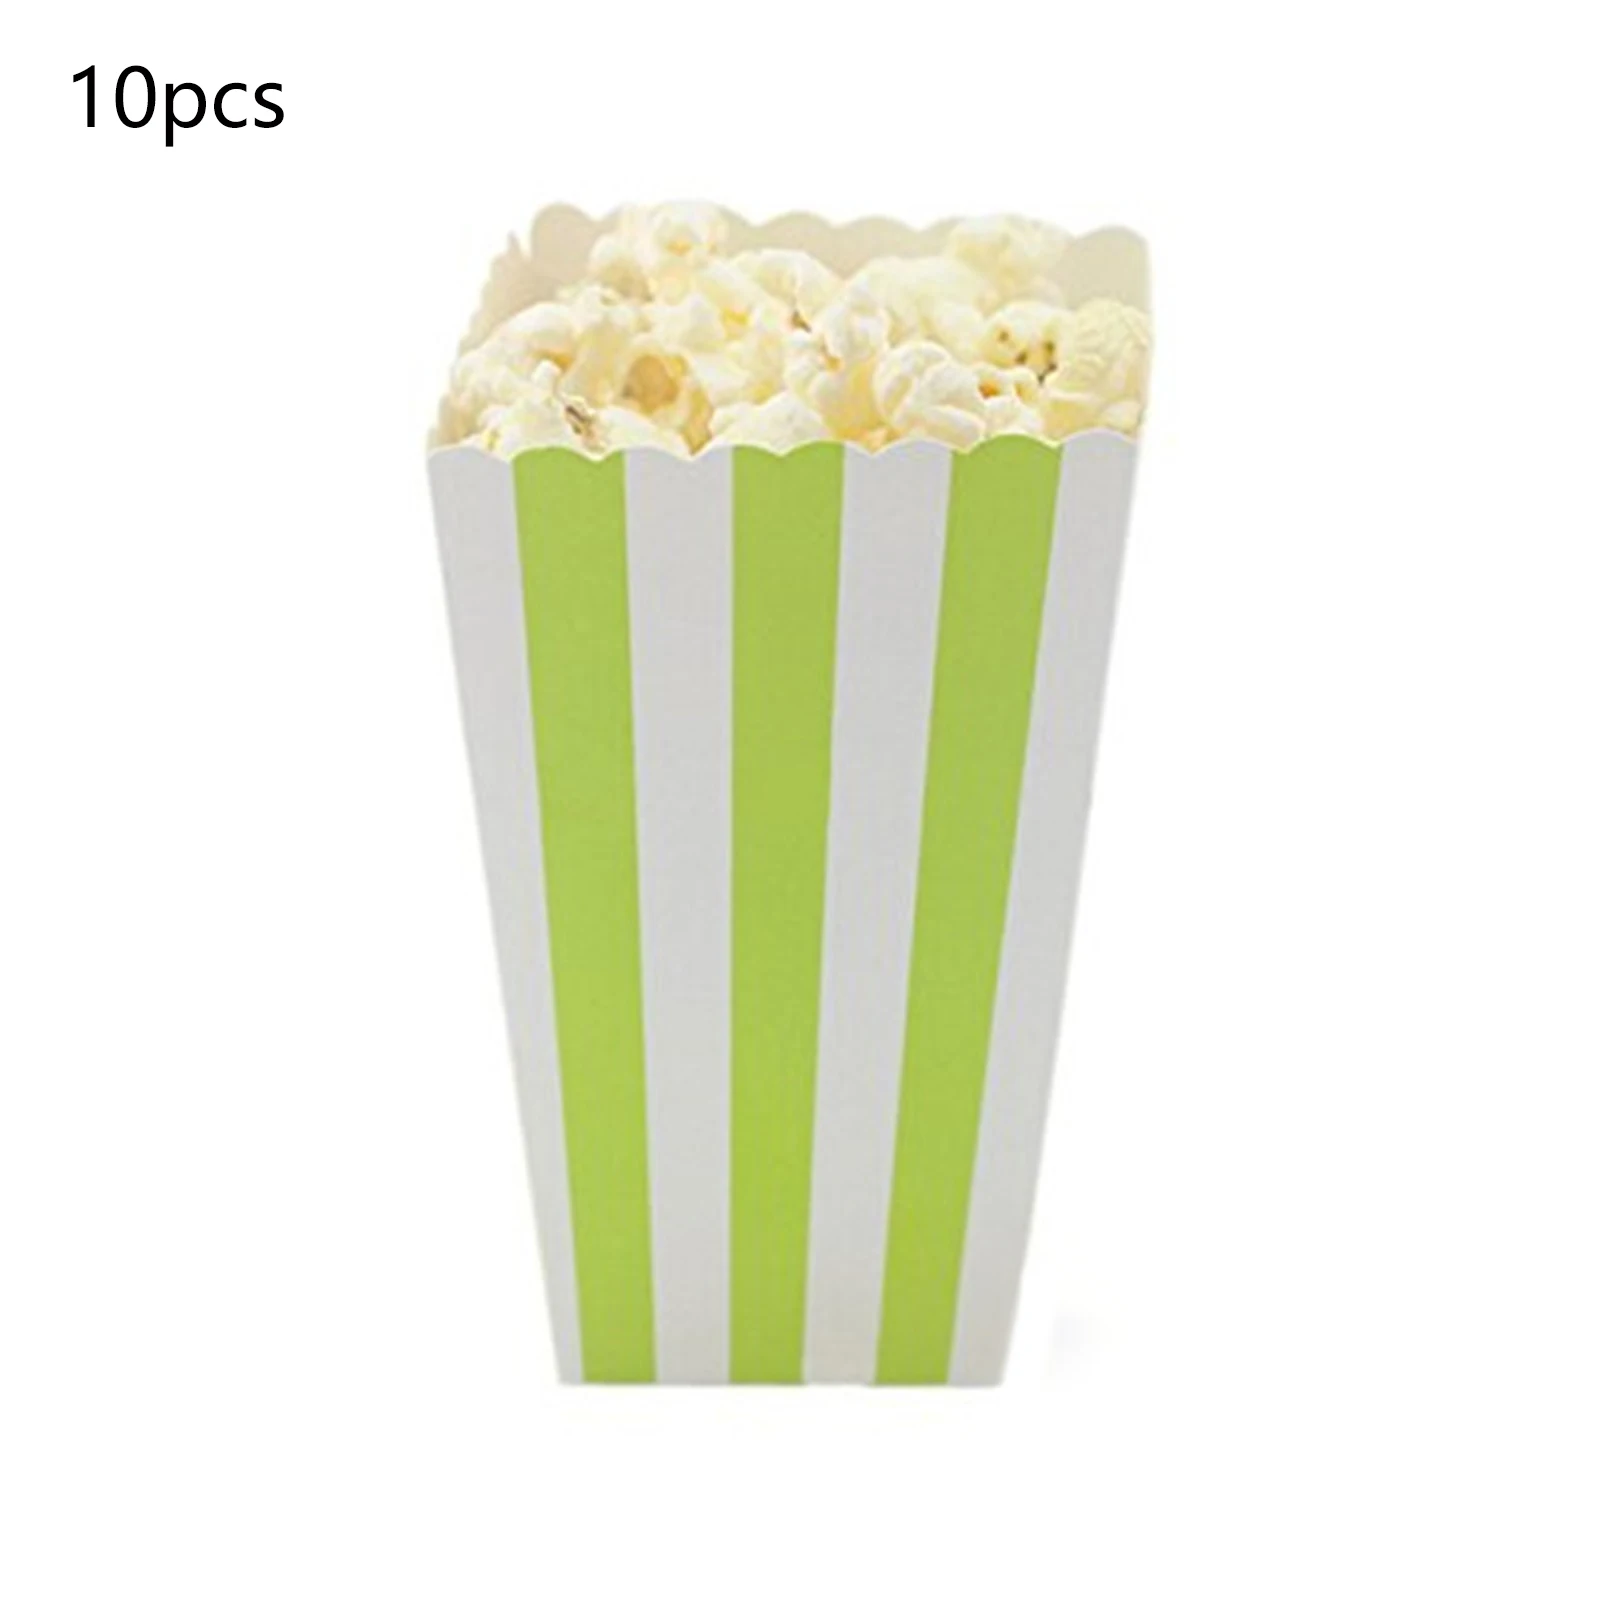 12x Pure White Popcorn Boxes for Family Movie Night Birthday Party Favors 